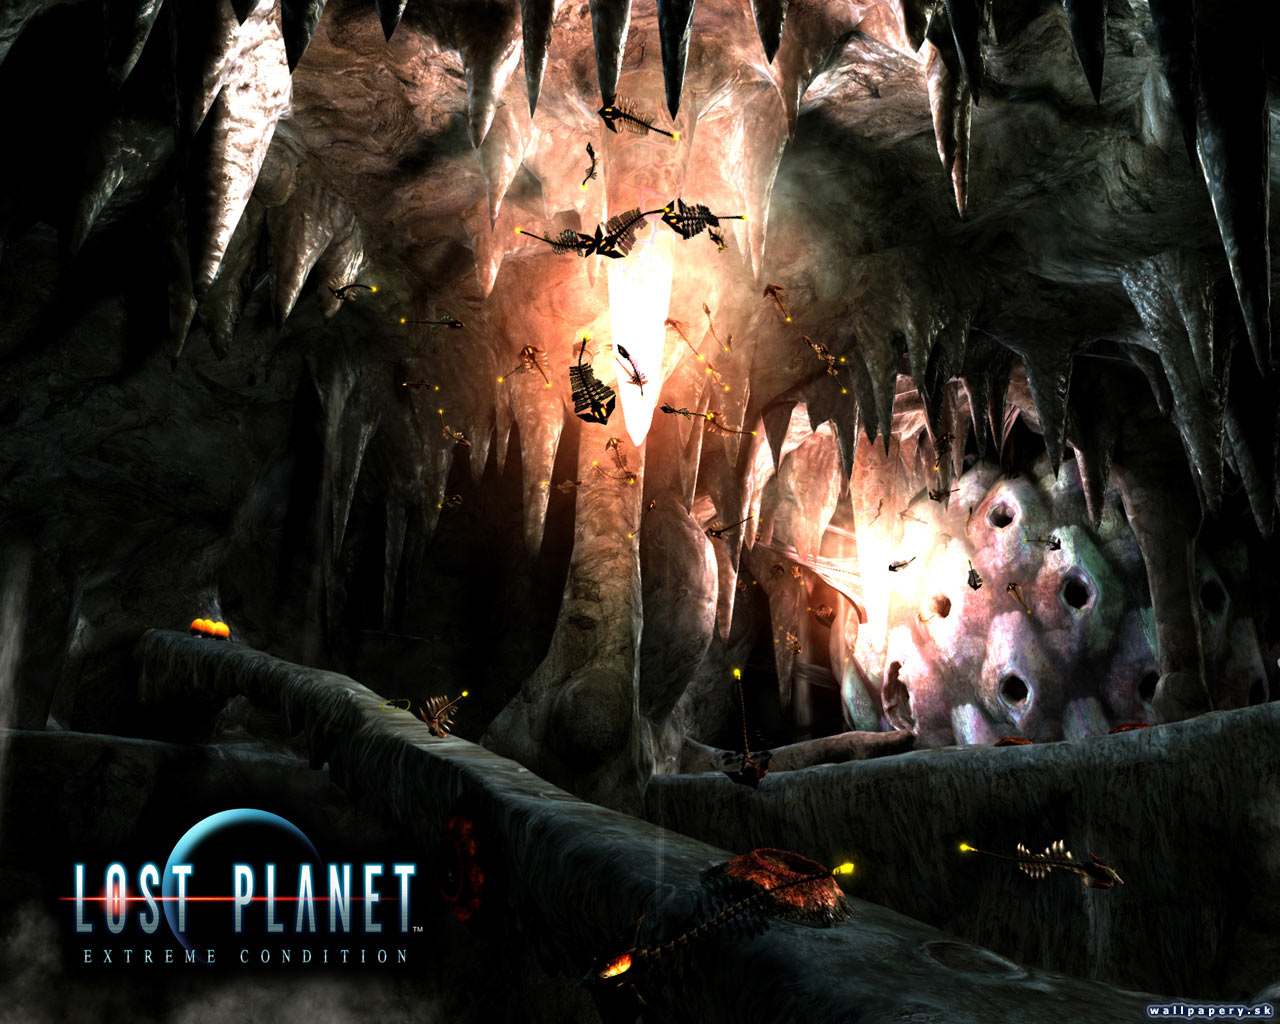 Lost Planet: Extreme Condition - wallpaper 18